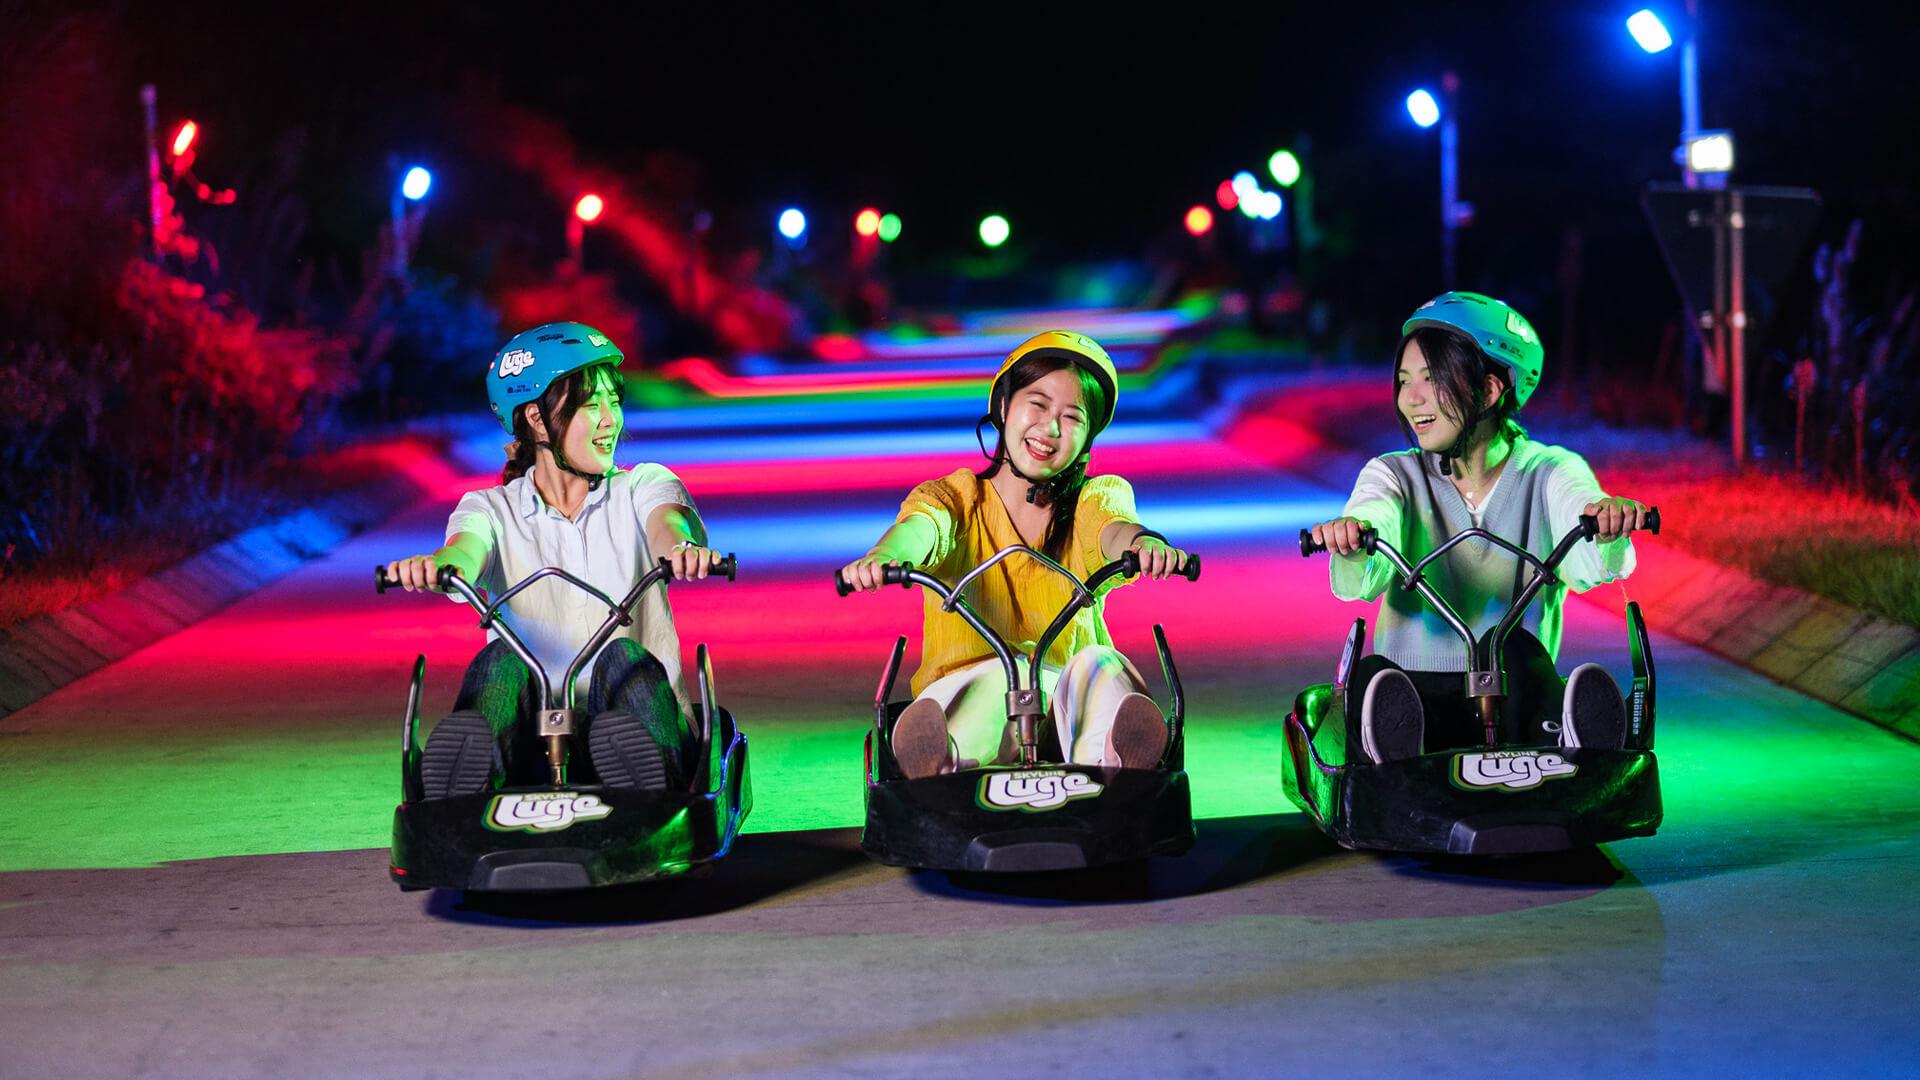 Three ladies smile and laugh as they ride the Night Luge at Skyline Luge Tongyeong.